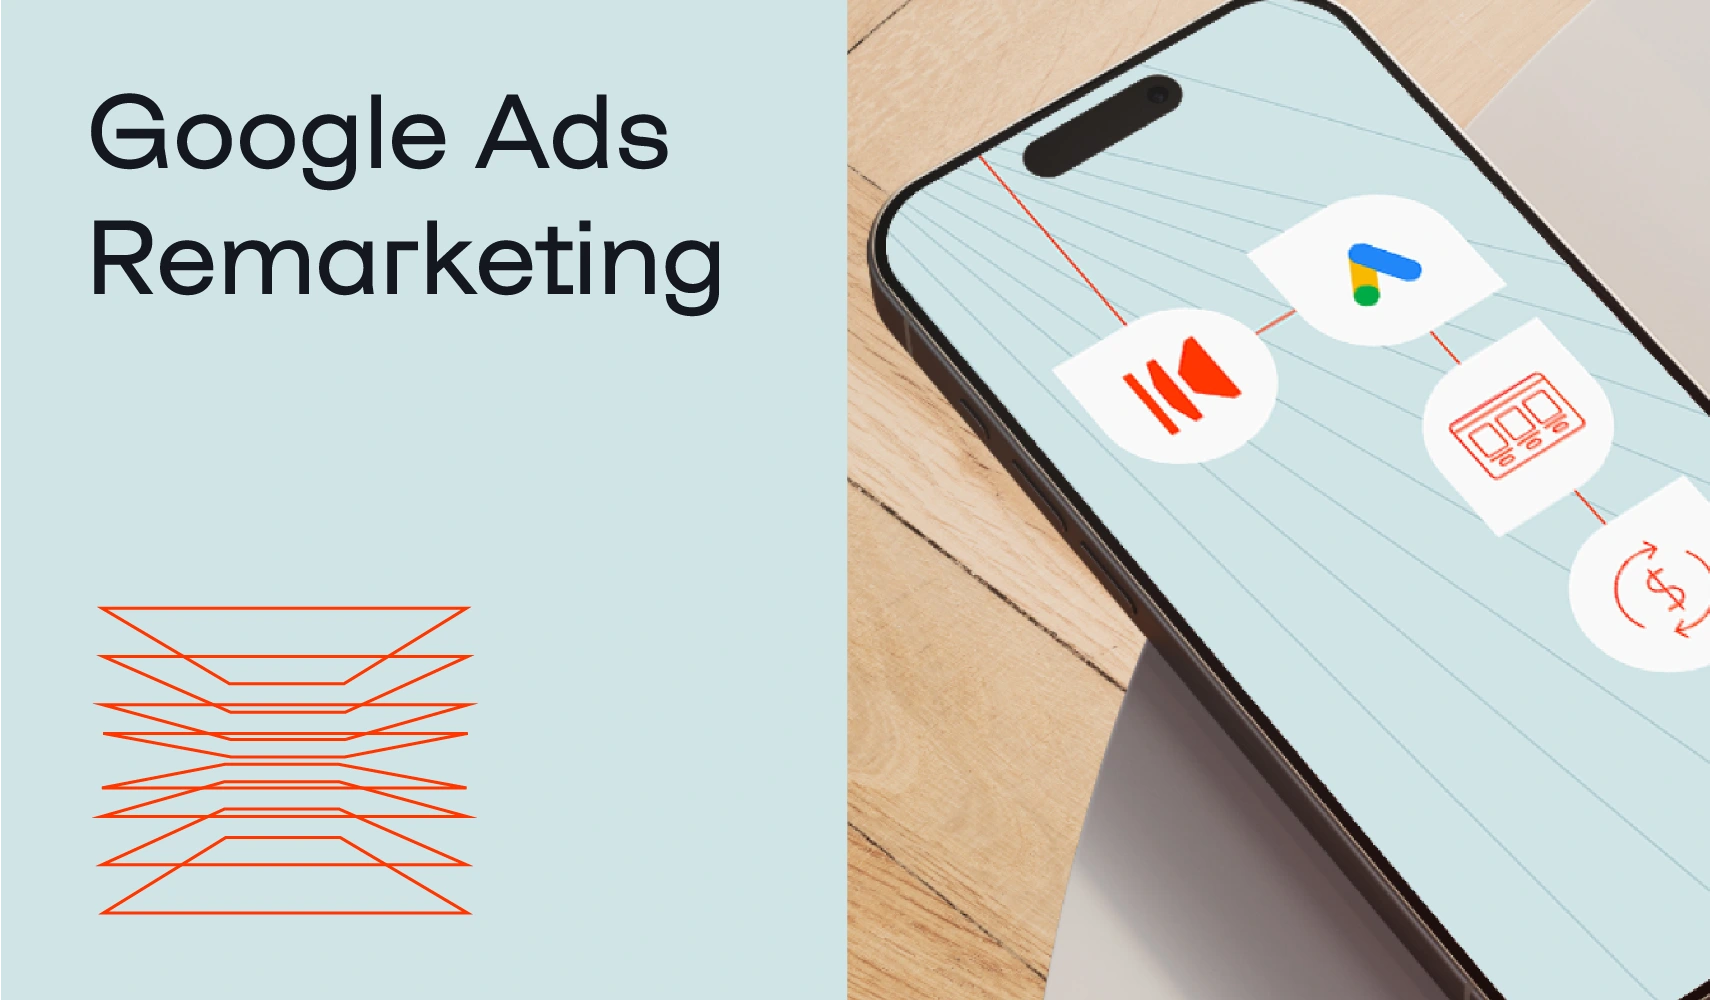 About remarketing advertising in Google Ads